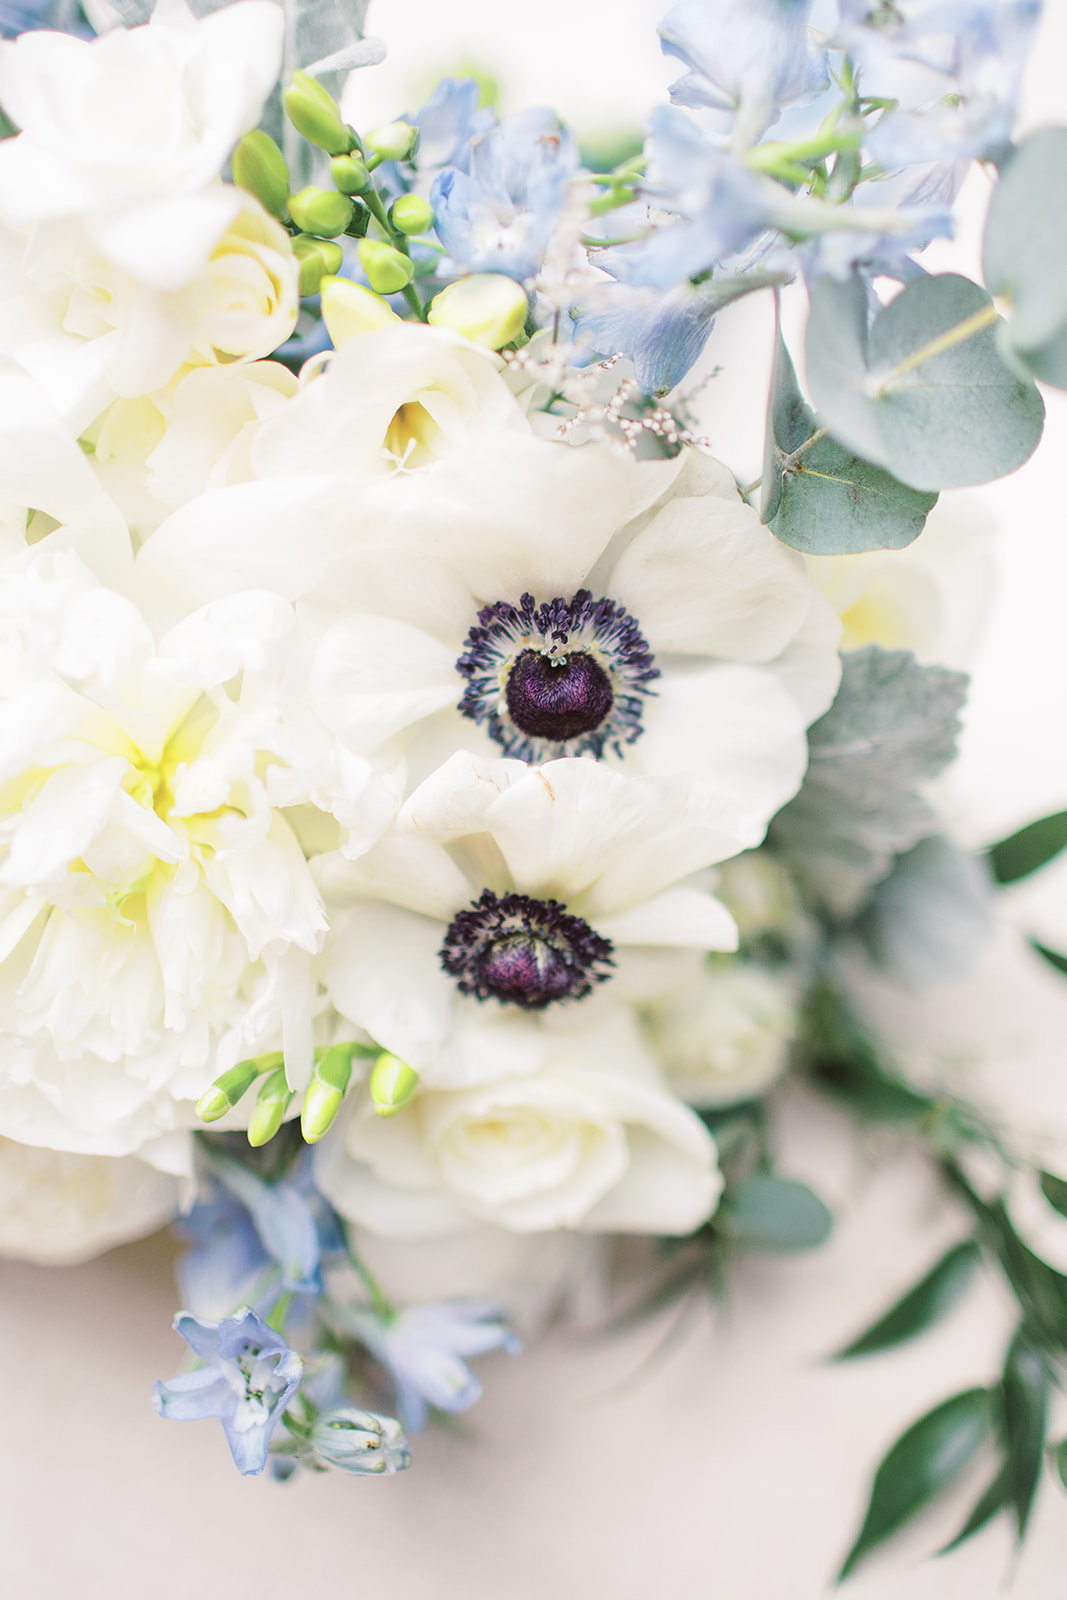 Detail photo of blue and white flowers and panda anemones